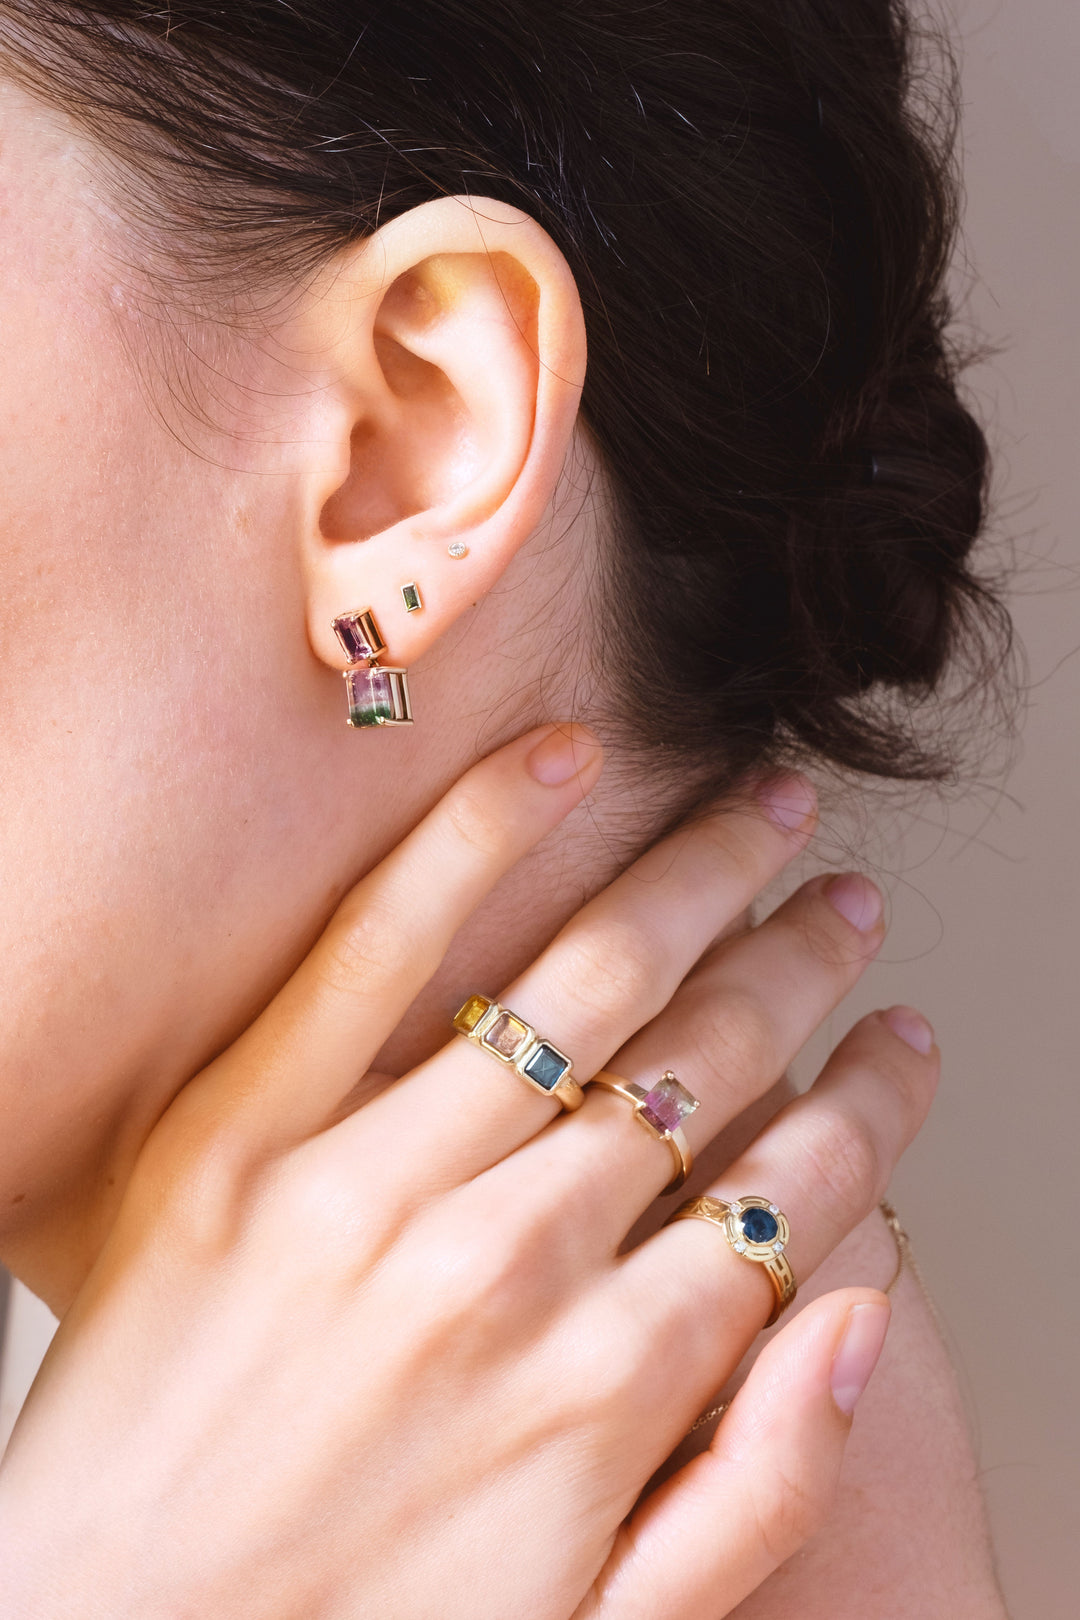 close up of a womans hand wearing lots of rings including watermelon sugar and golden futures rings. Also close up of wearing an earring stack